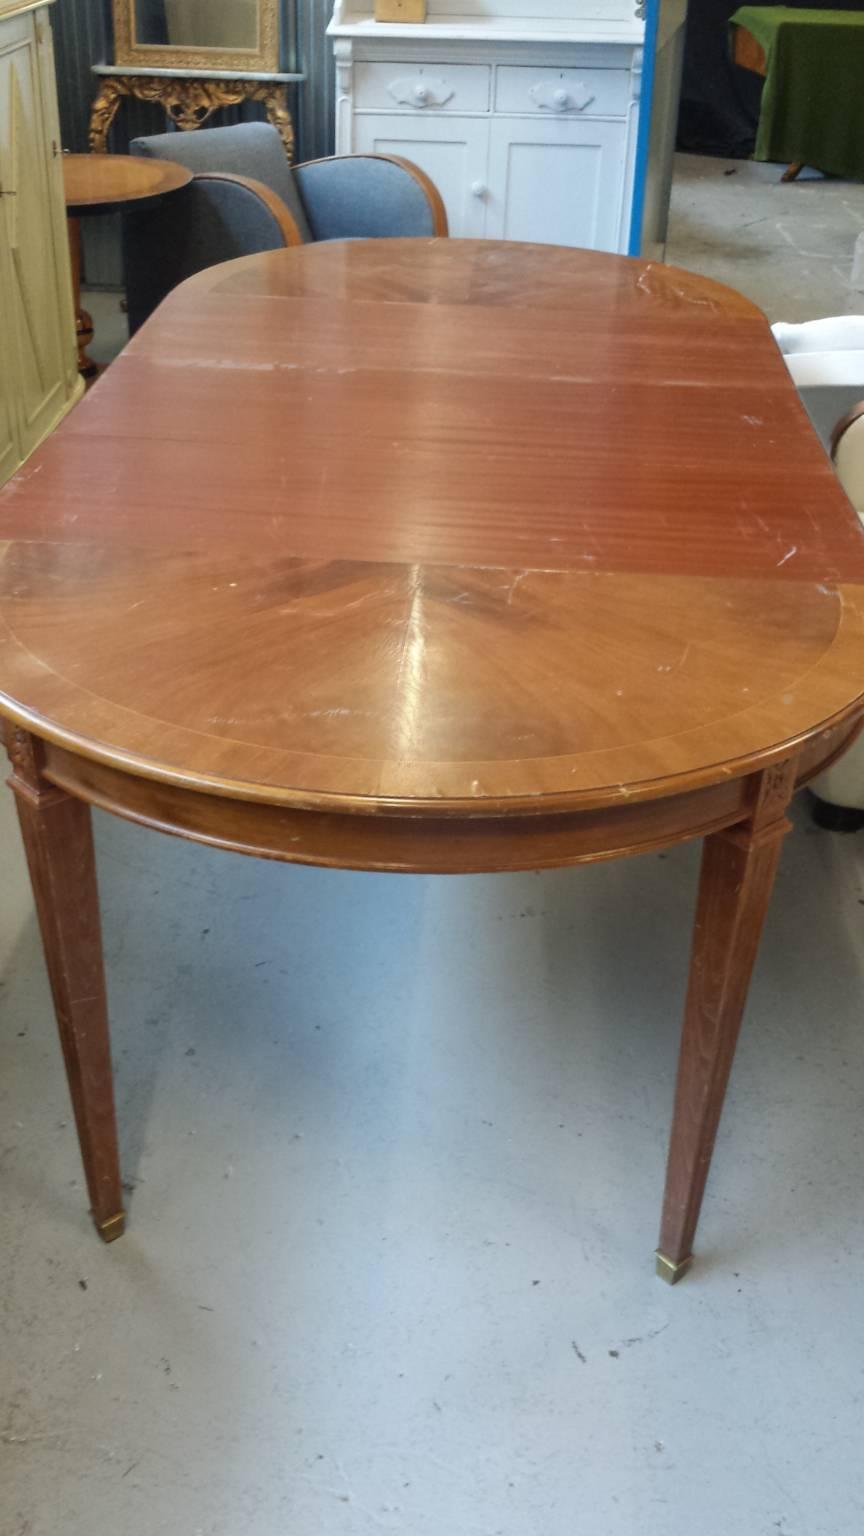 Unusual early 1900s Gustavian extendable dining table with top grade quilted mahogany veneers,

Lovely pyramid fluted legs with a rosette detailing and brass feet.

It is approximate 110 cm in diameter un-extended and goes to 230 cm extended